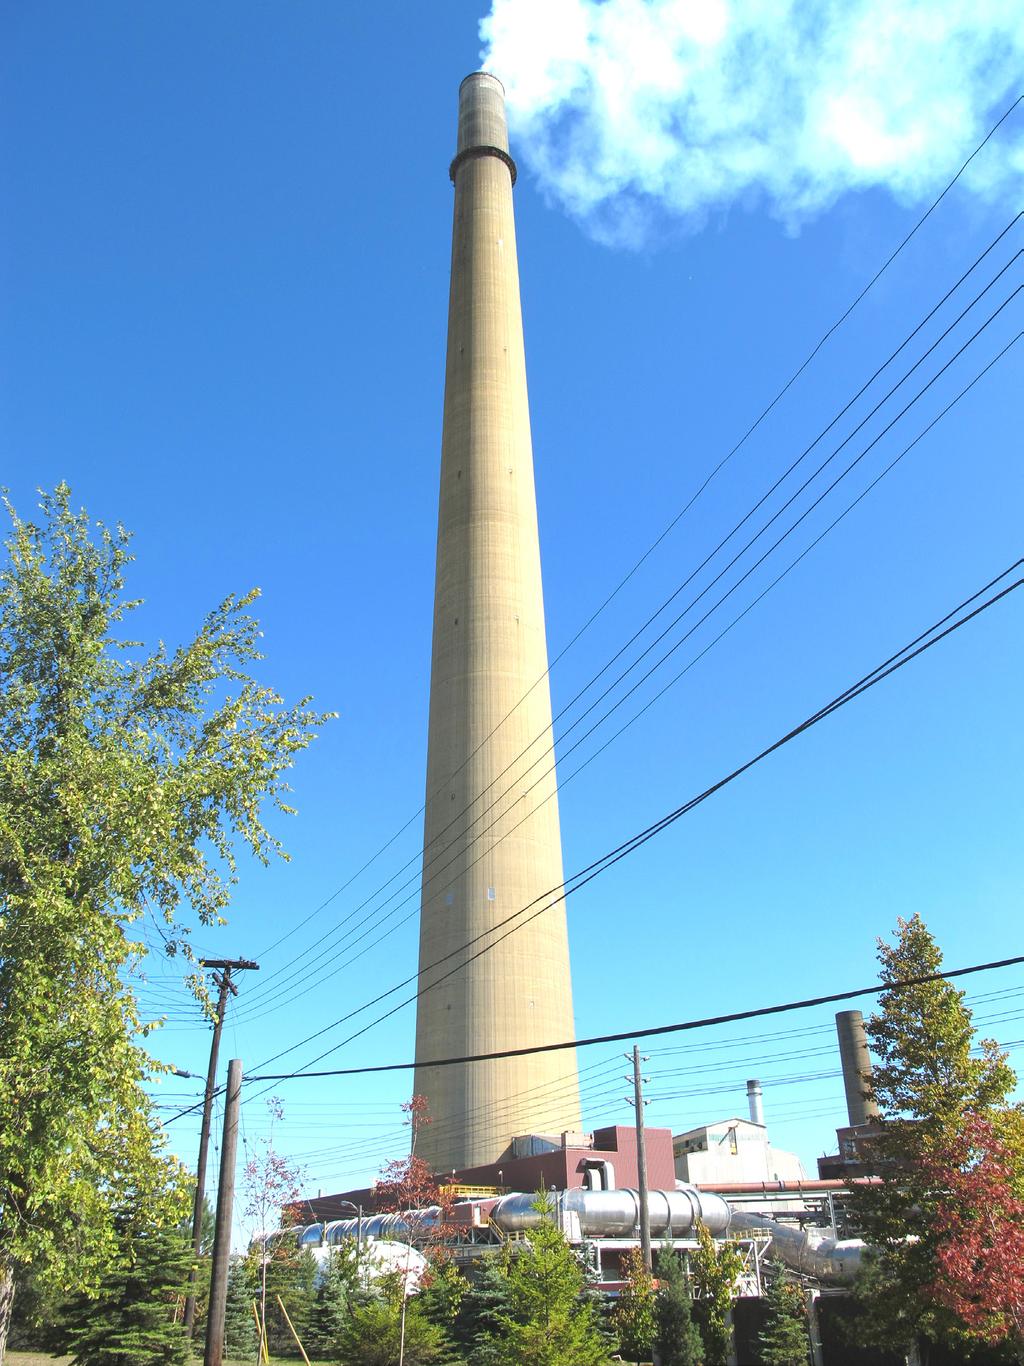 Copper Cliff Smelter Superstack, Greater Sudbury Stop 1: Little Italy, Copper Cliff Wow! That chimney is tall.